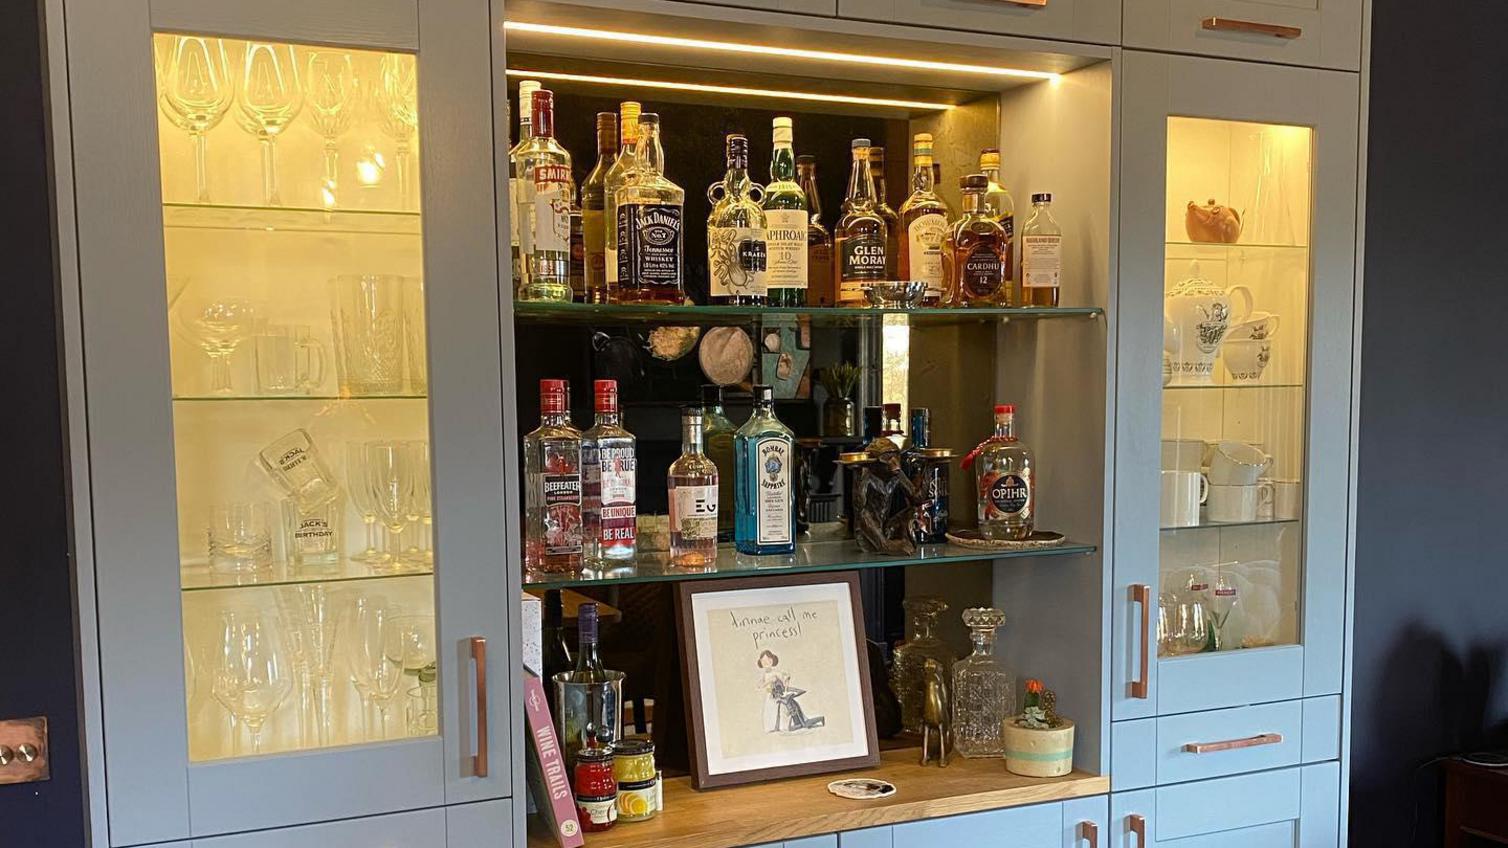 Home bar idea with light-grey shaker cupboards, two glass doors next to open shelving showing crockery and drink bottles.